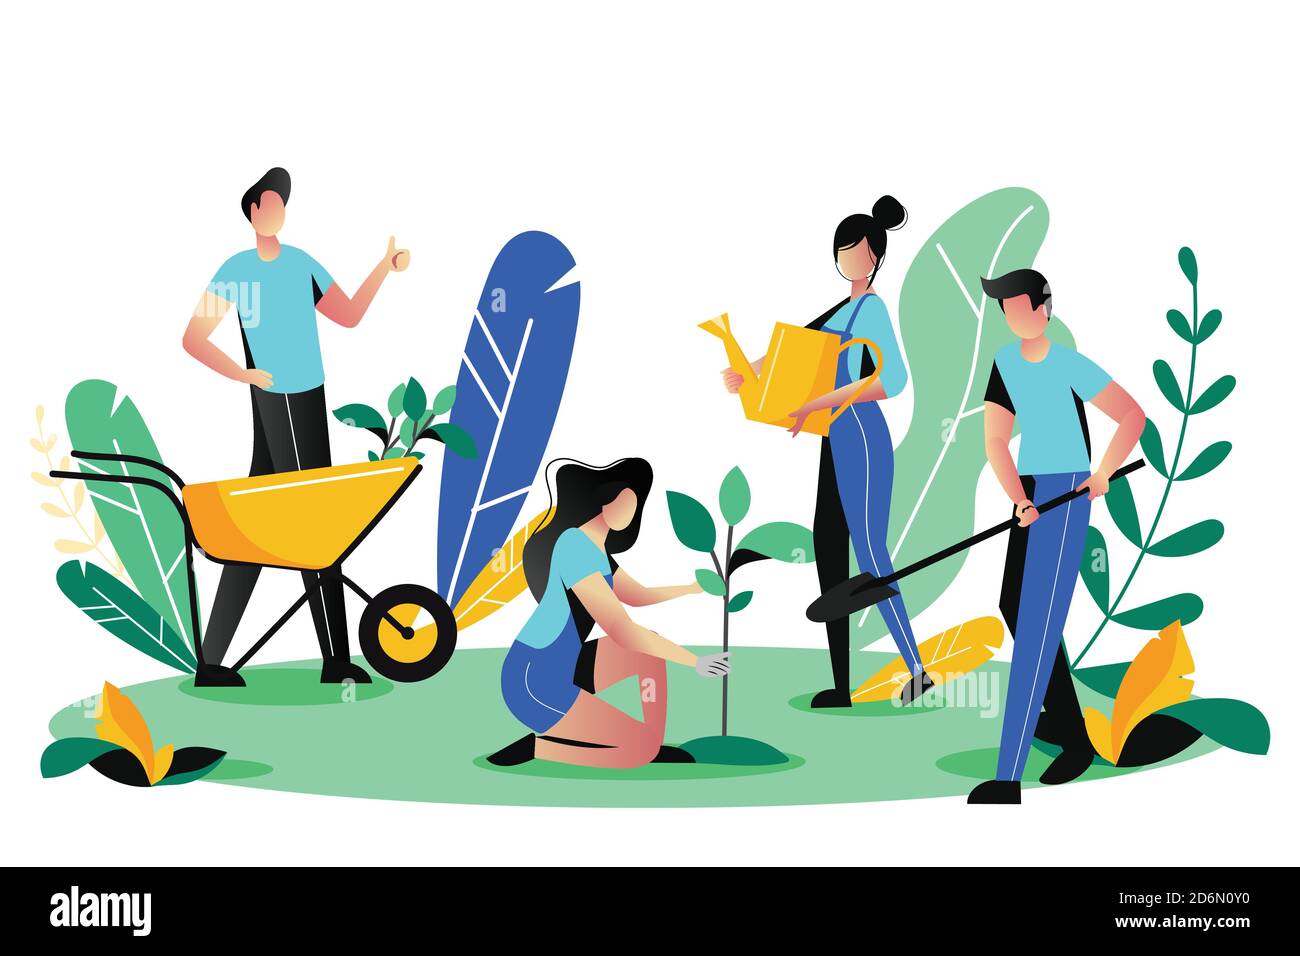 Volunteering, charity social concept. Volunteer people plant trees in city park, vector flat illustration. Ecological lifestyle. Stock Vector